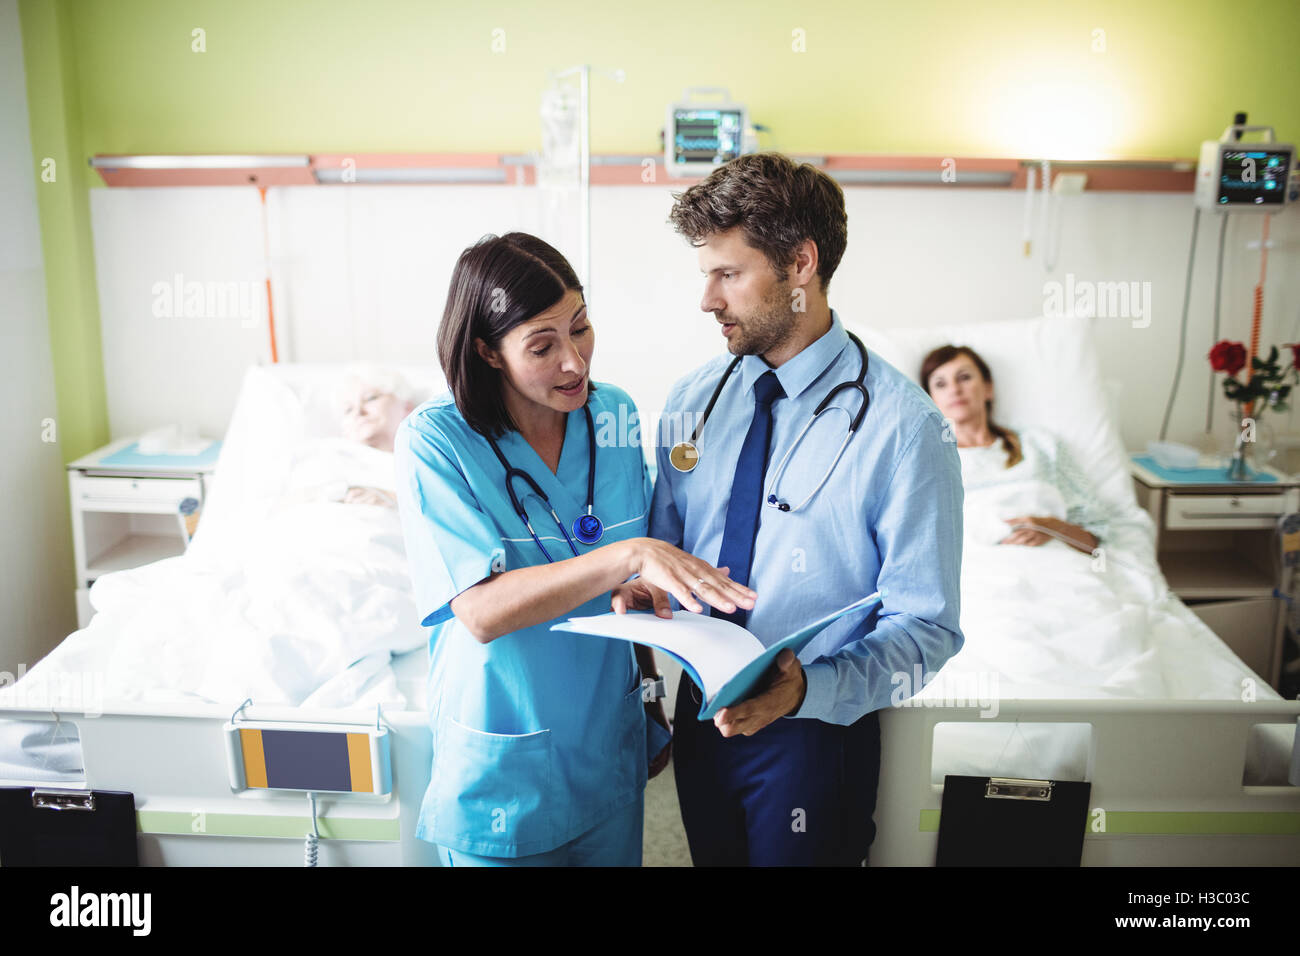 Doctor interacting with nurse Stock Photo